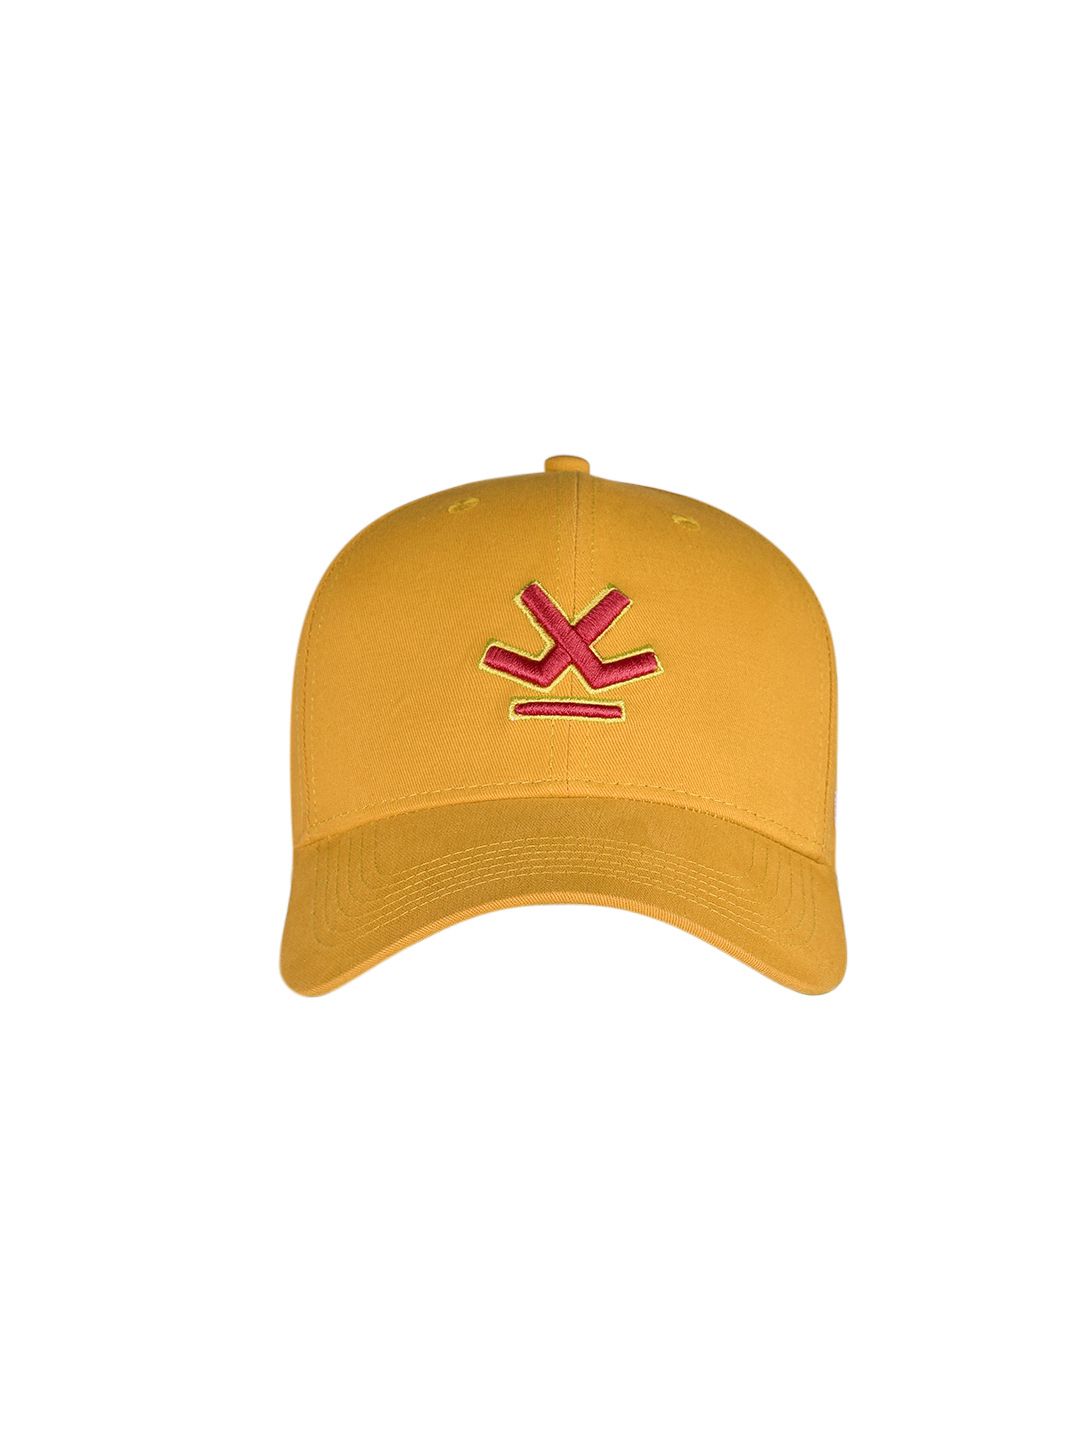 WROGN Unisex Yellow Embroidered Baseball Cap Price in India